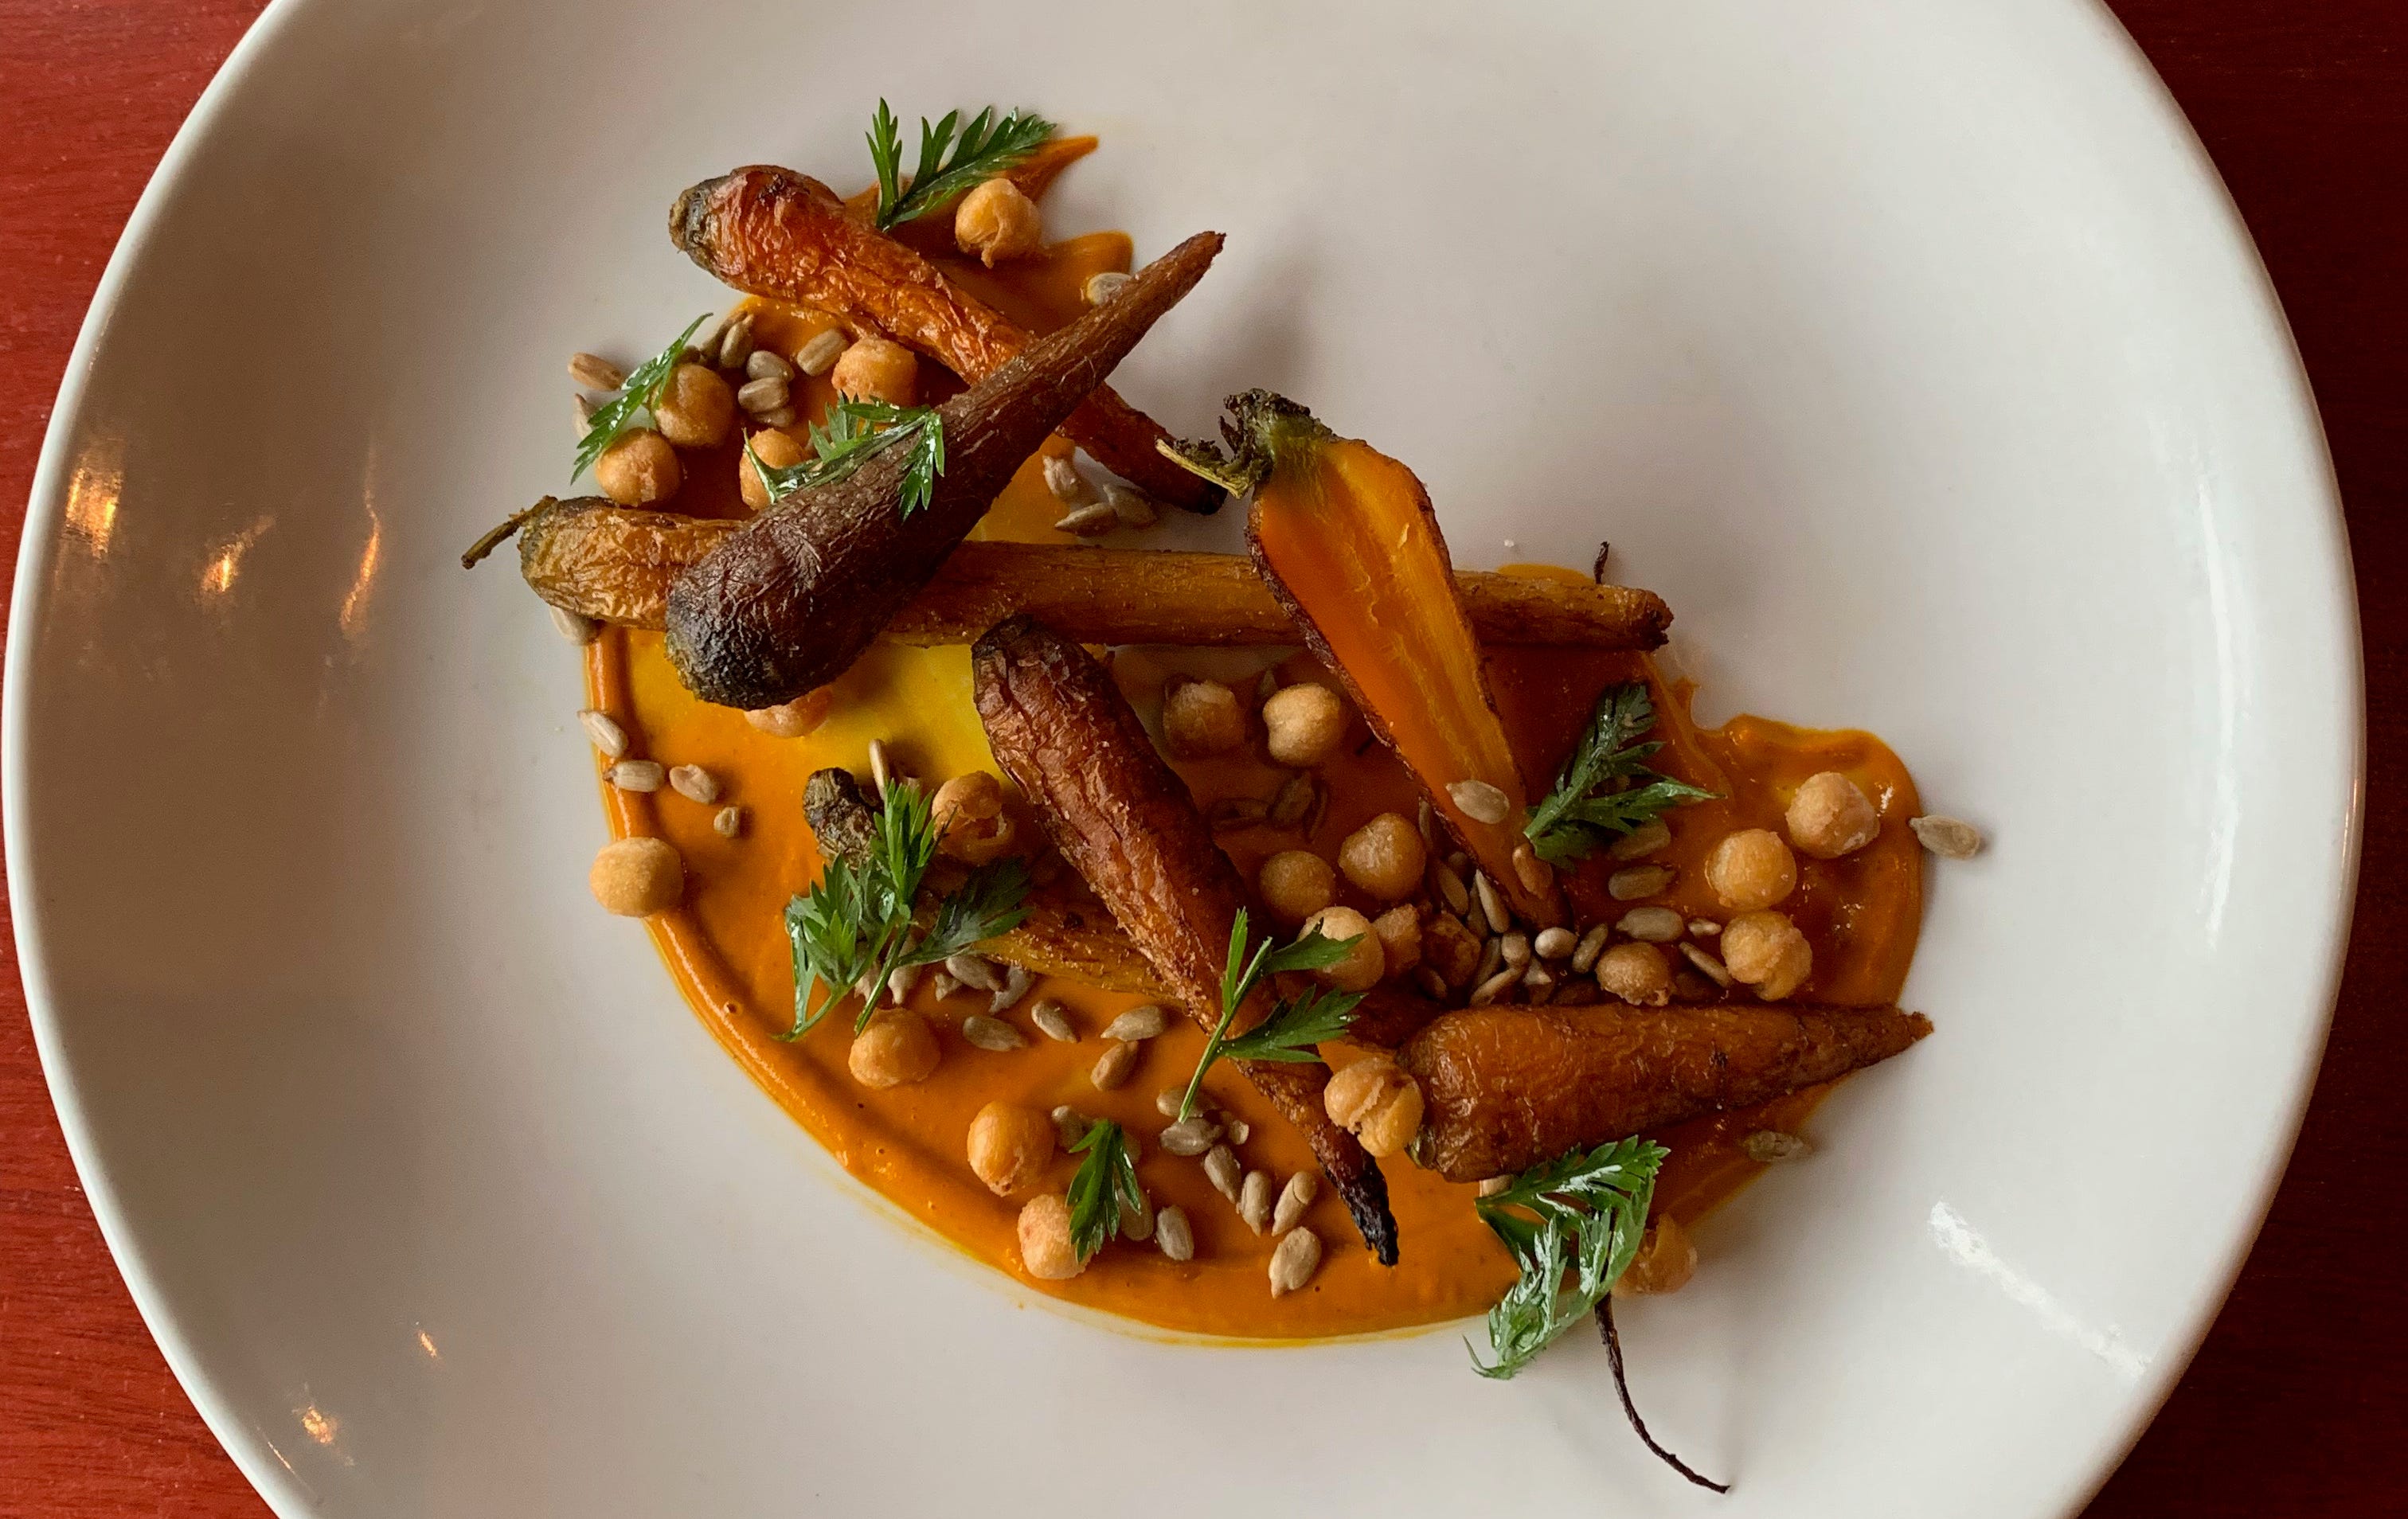 Carrot barbecue sauce is the bed for roast carrots, fried chickpeas and sunflower seeds, a dish at the Diplomat, 815 E. Brady St.